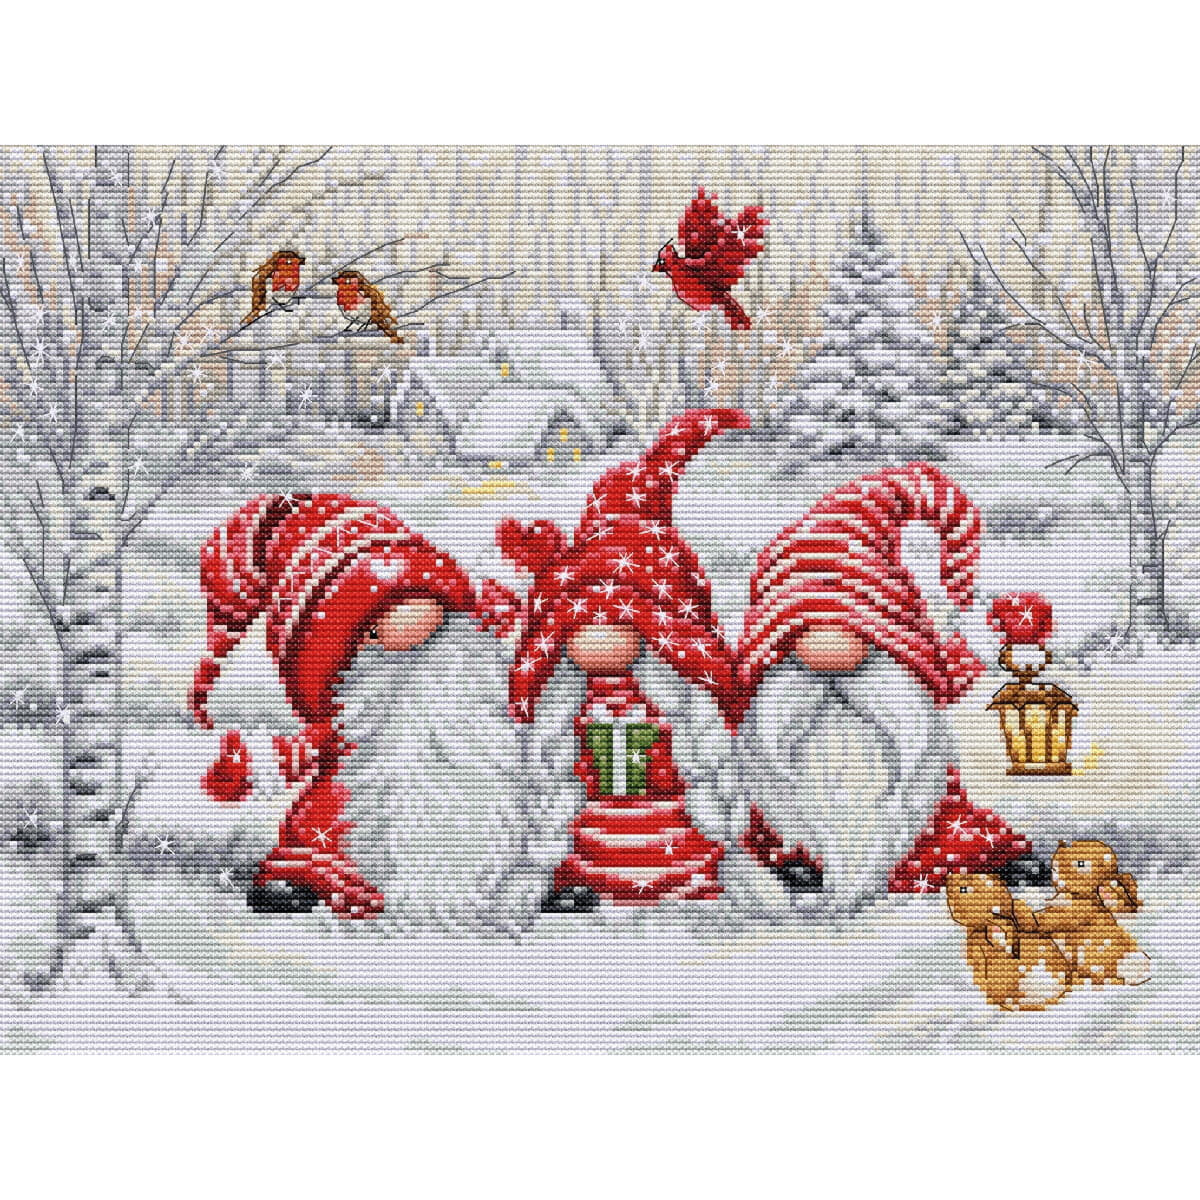 Three dwarves in red and white winter clothing stand in a...